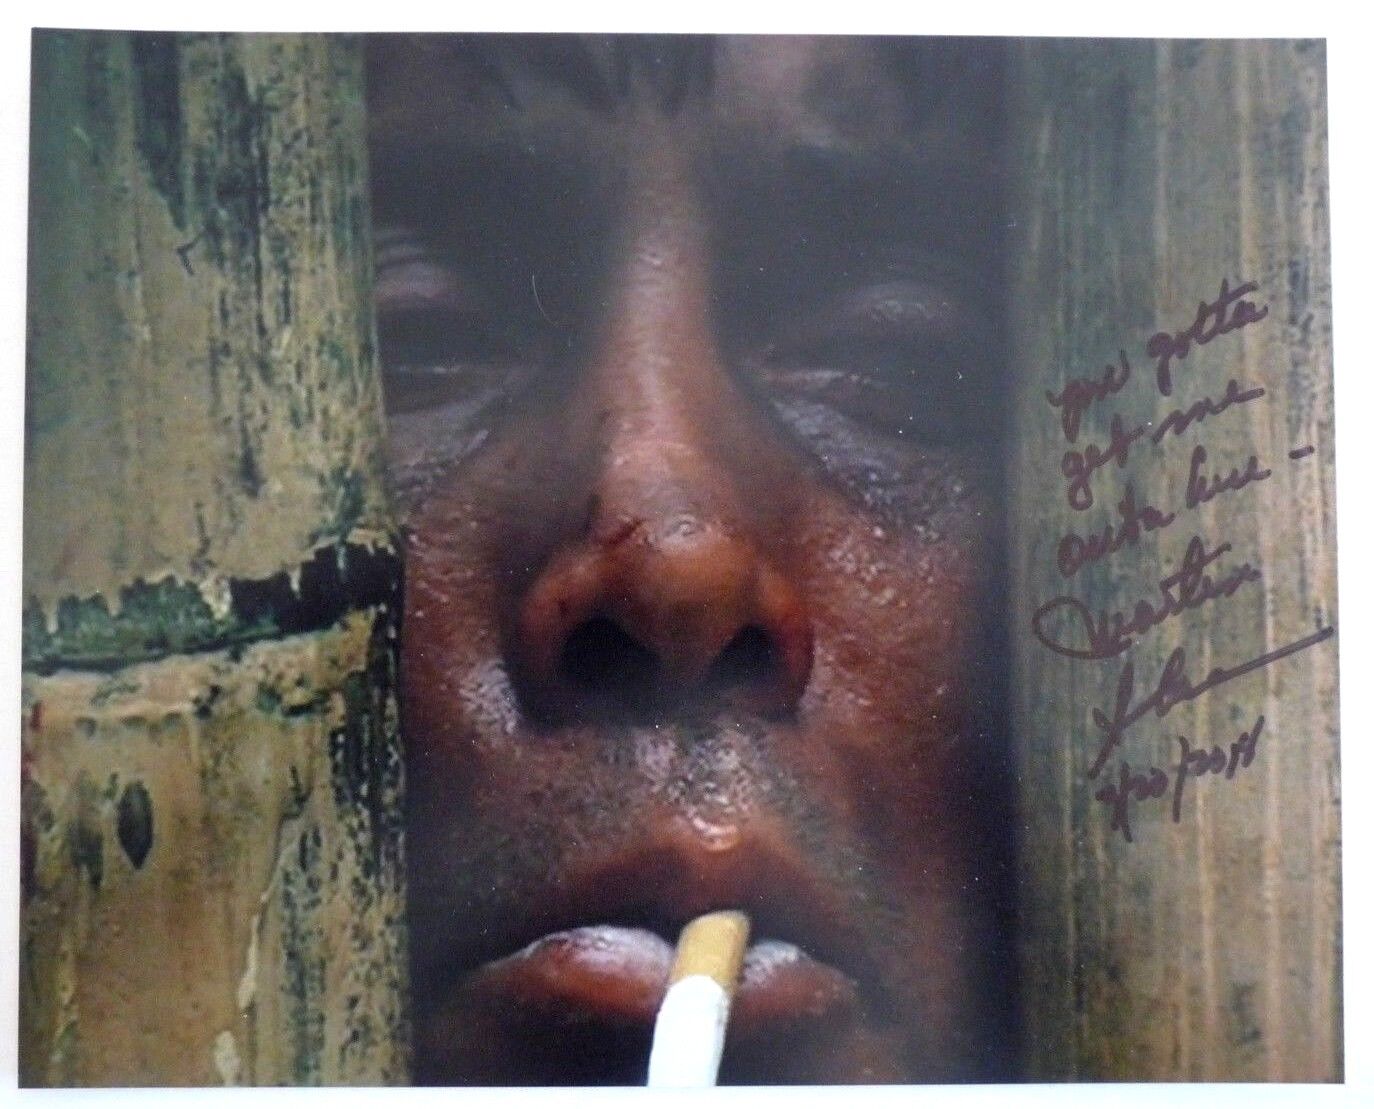 Martin Sheen Signed Apocalypse Now 8x10 Photo Poster painting W Inscription BAS Certified #2